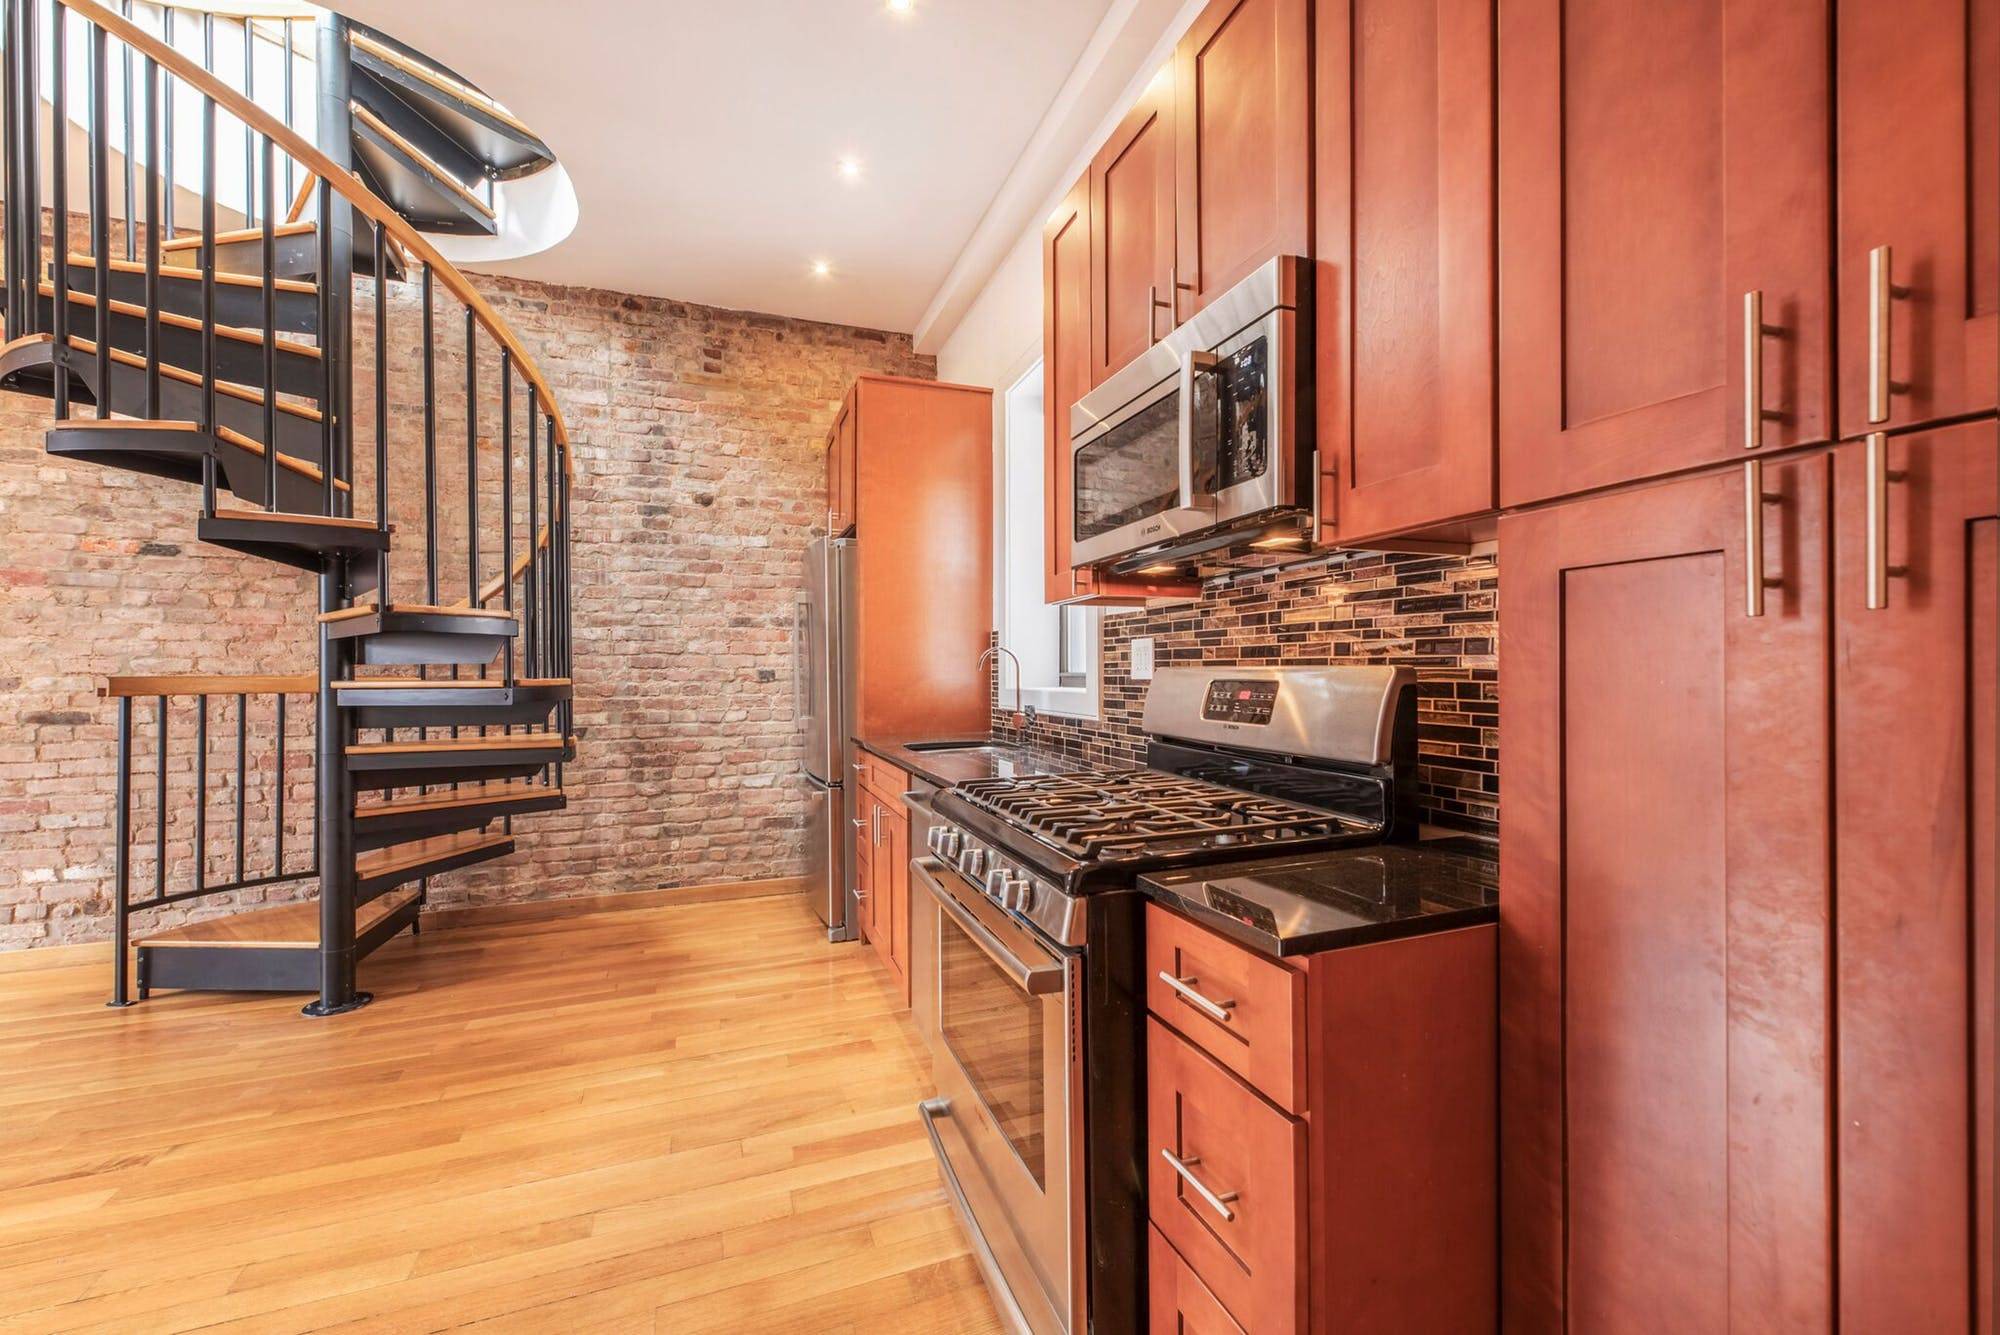 Located on a quiet tree lined street in the heart of Soho, this 6 story stunner offers the perks of new construction without losing any of its pre war charm.